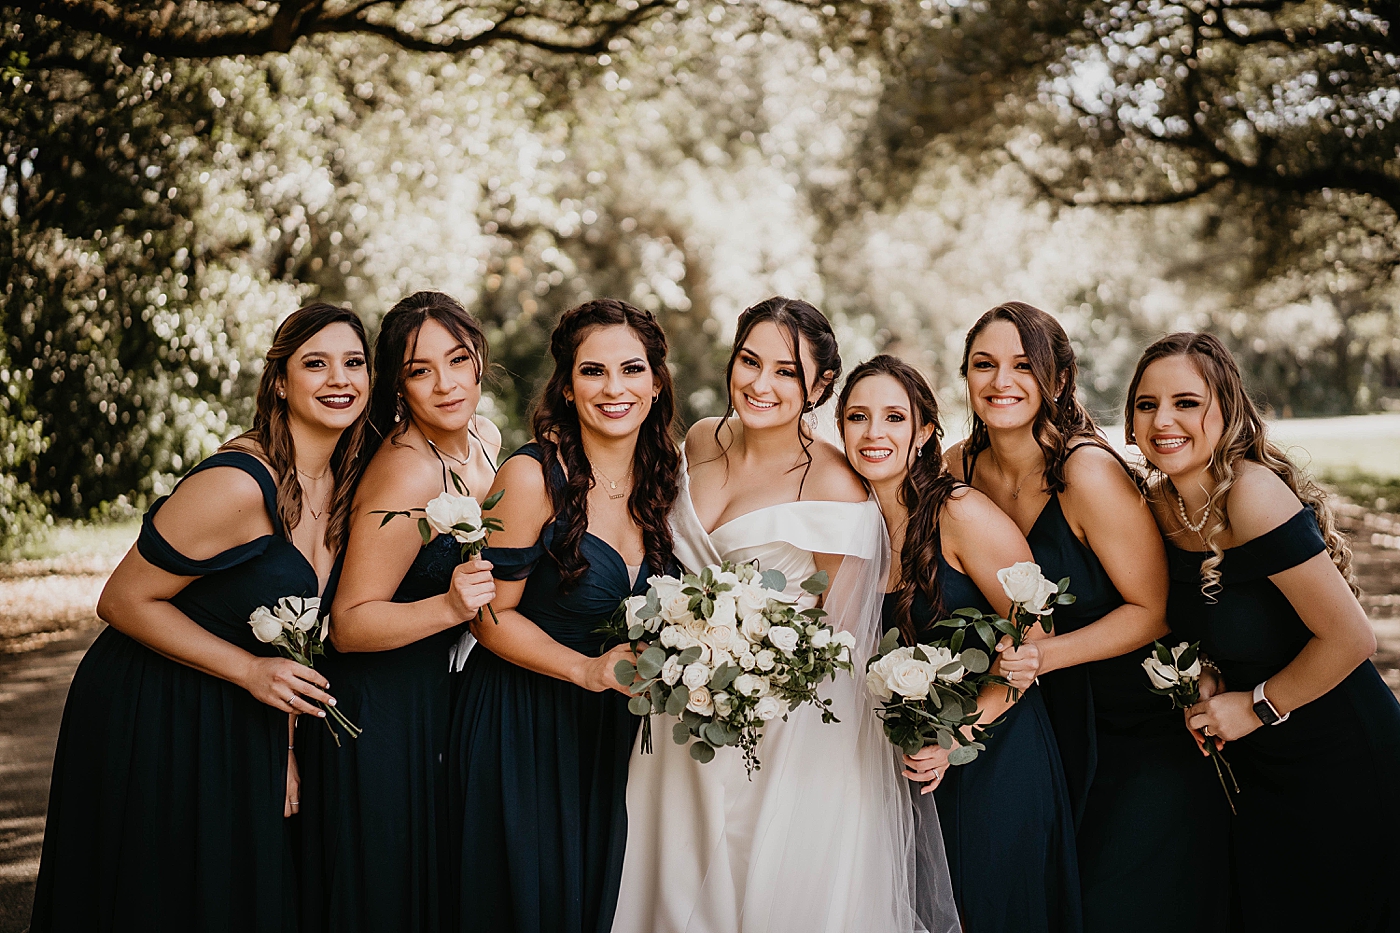 Bride with Bridesmaids Lavan Venue Wedding Photography captured by South Florida Wedding Photographer Krystal Capone Photography